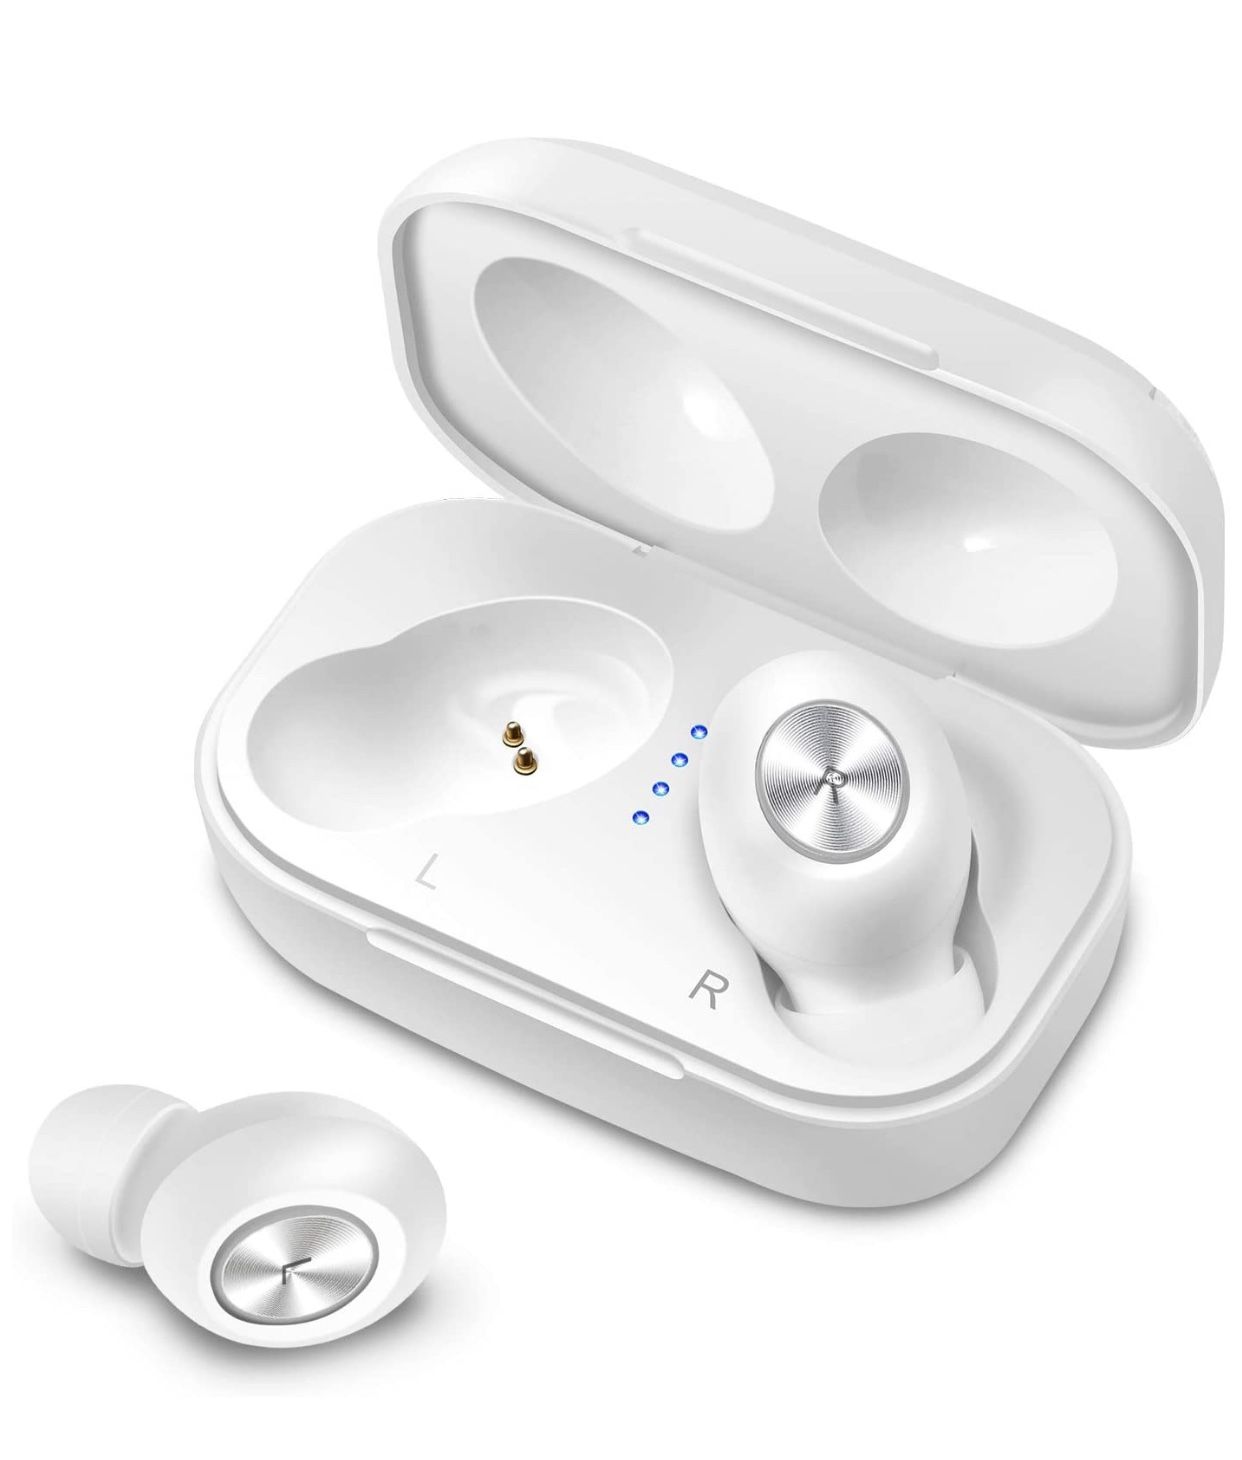 Wireless Earbuds Bluetooth 5.0 Headphones, in-Ear Stereo Wireless Earbuds with Microphone One-Step Pairing with Charging Case, IPX6 Water Proof for R